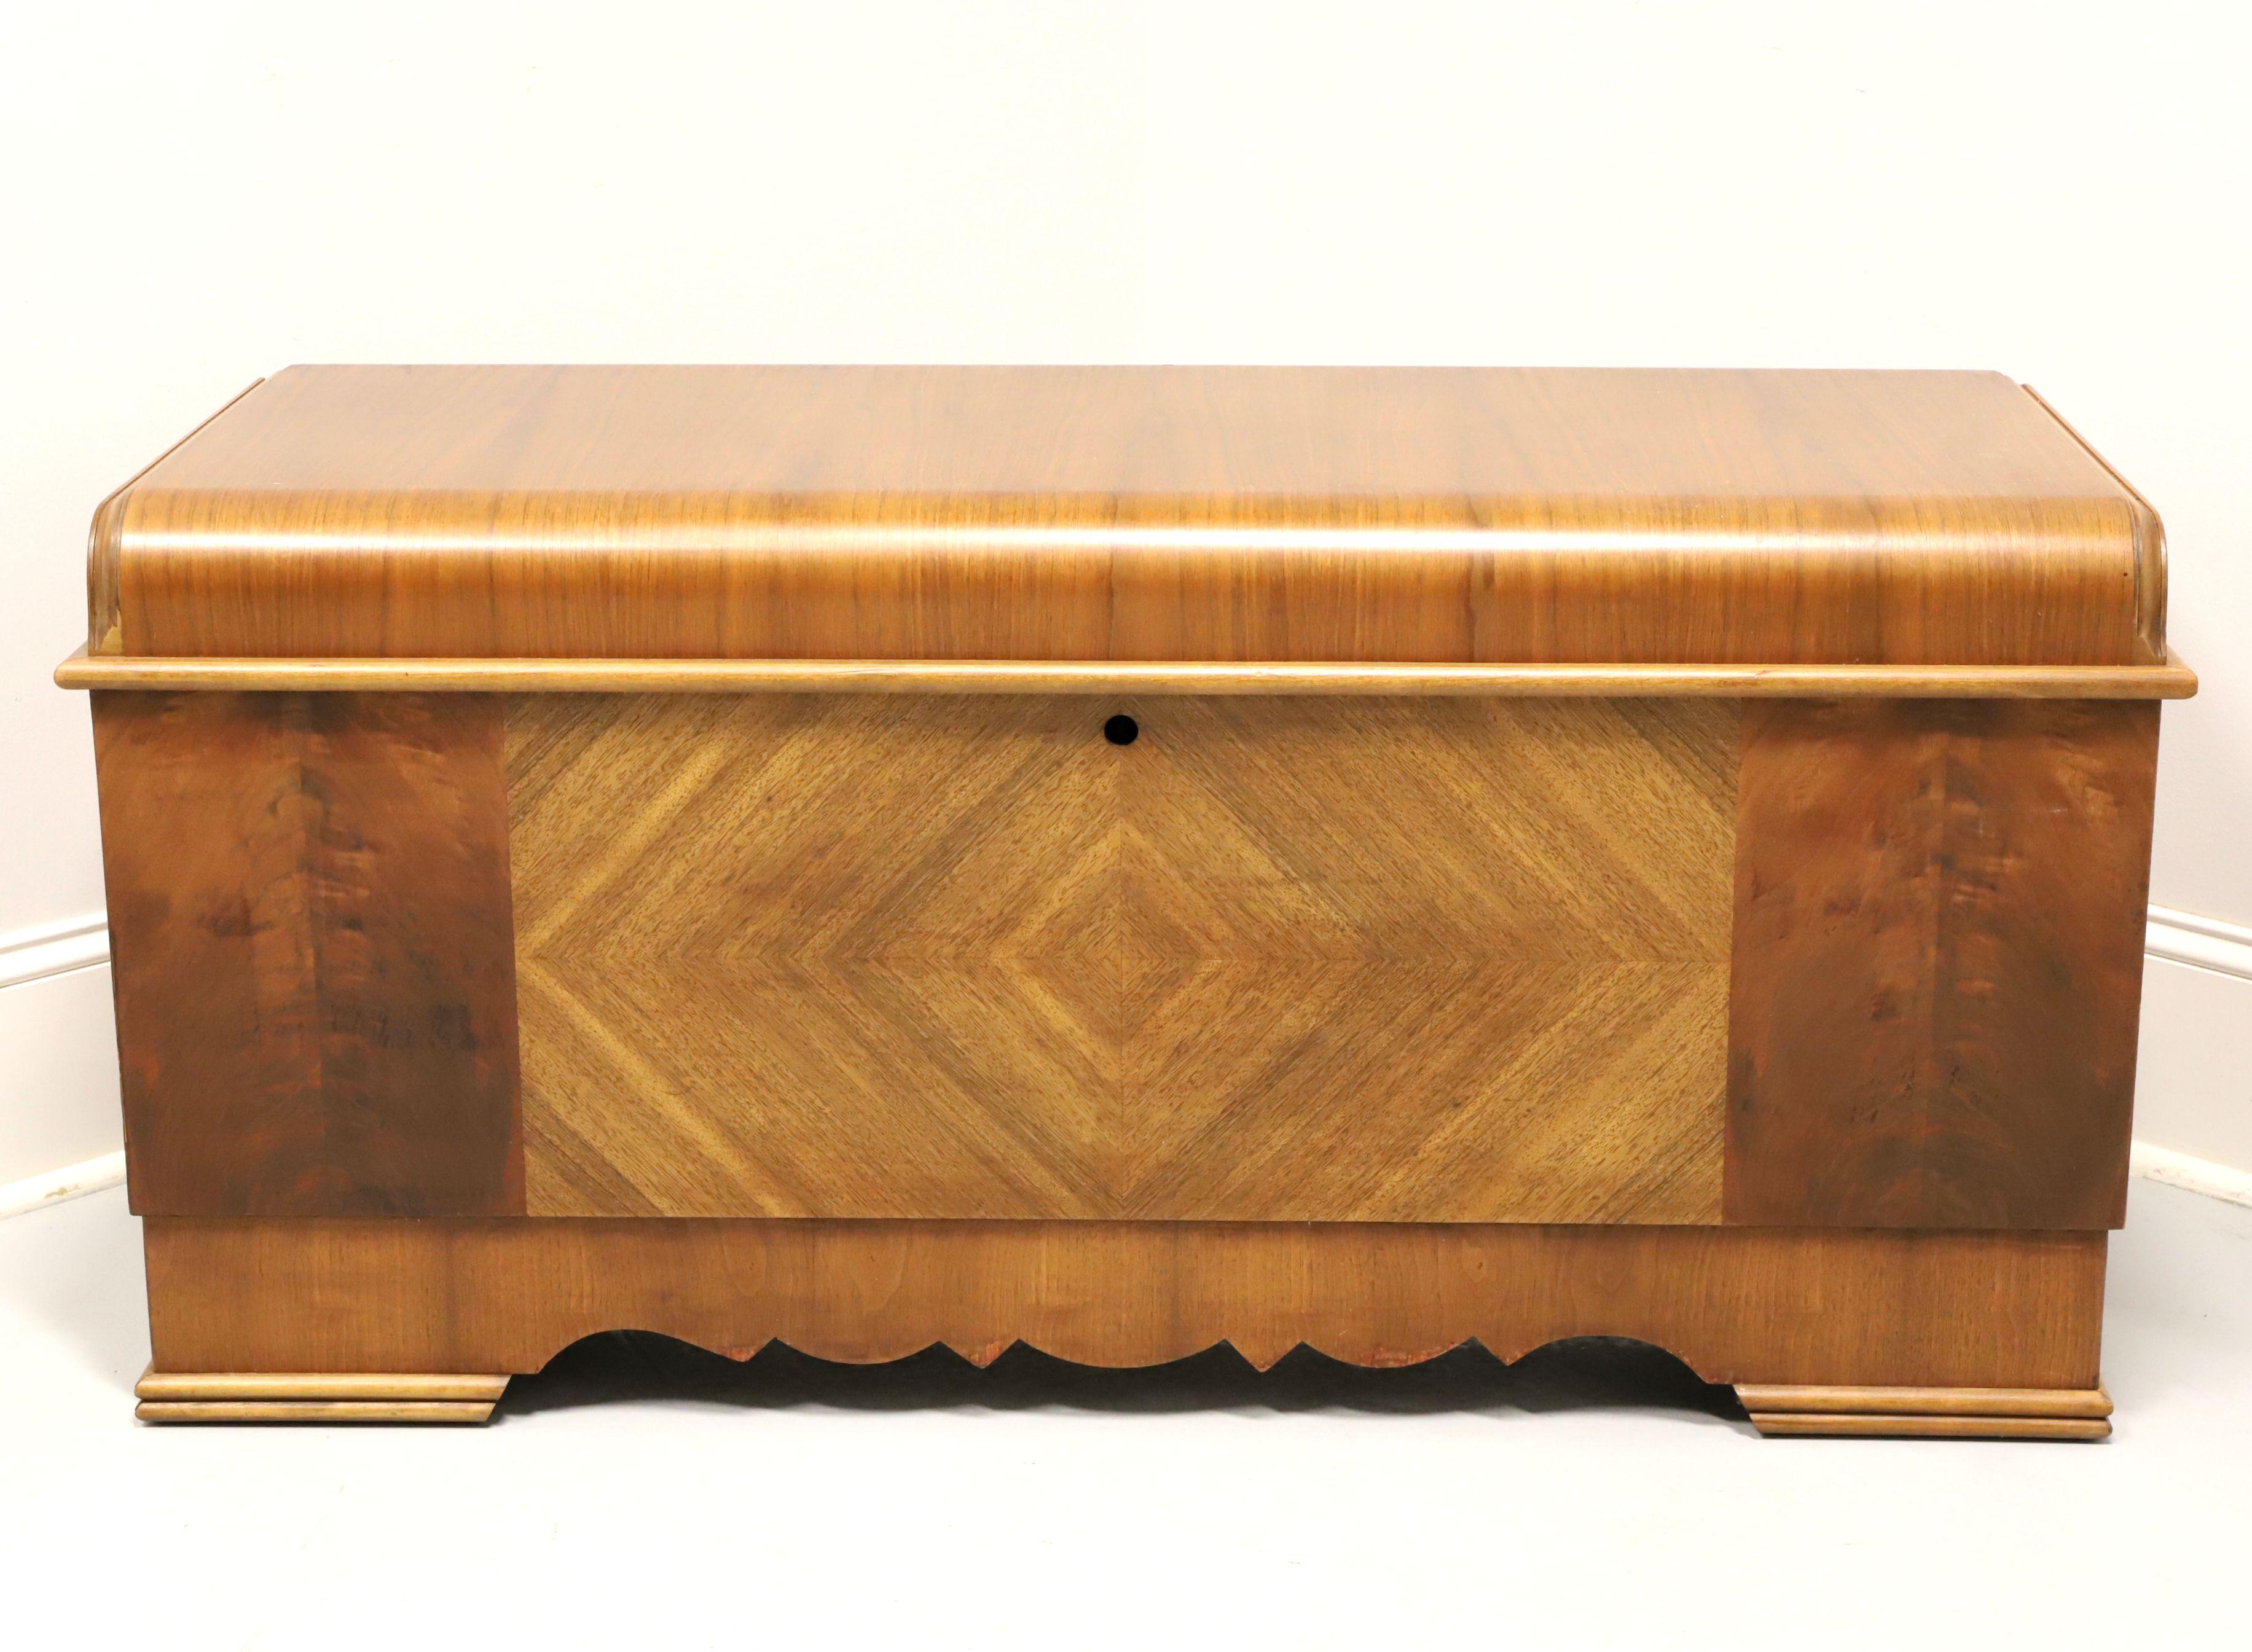 An Art Deco style cedar chest by Lane. Walnut with inlaid parquetry veneers, rounded lid, metal hinge hardware, cedar lined interior, a hinged upper felt lined divided storage tray and decoratively carved apron. Does NOT lock or latch, as required